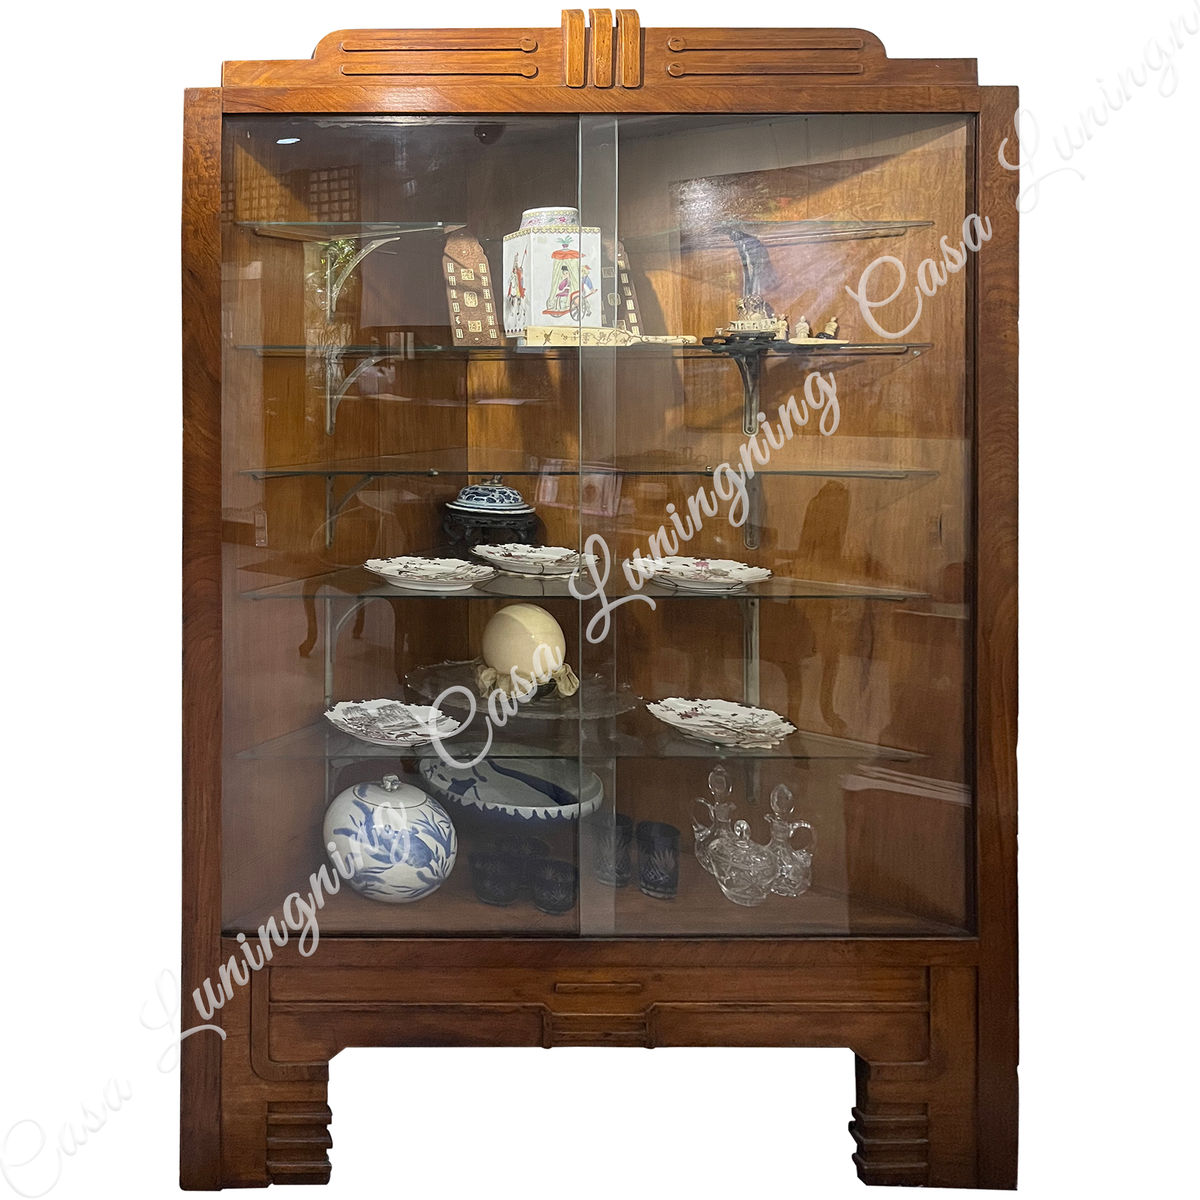 A set of art deco display cabinets